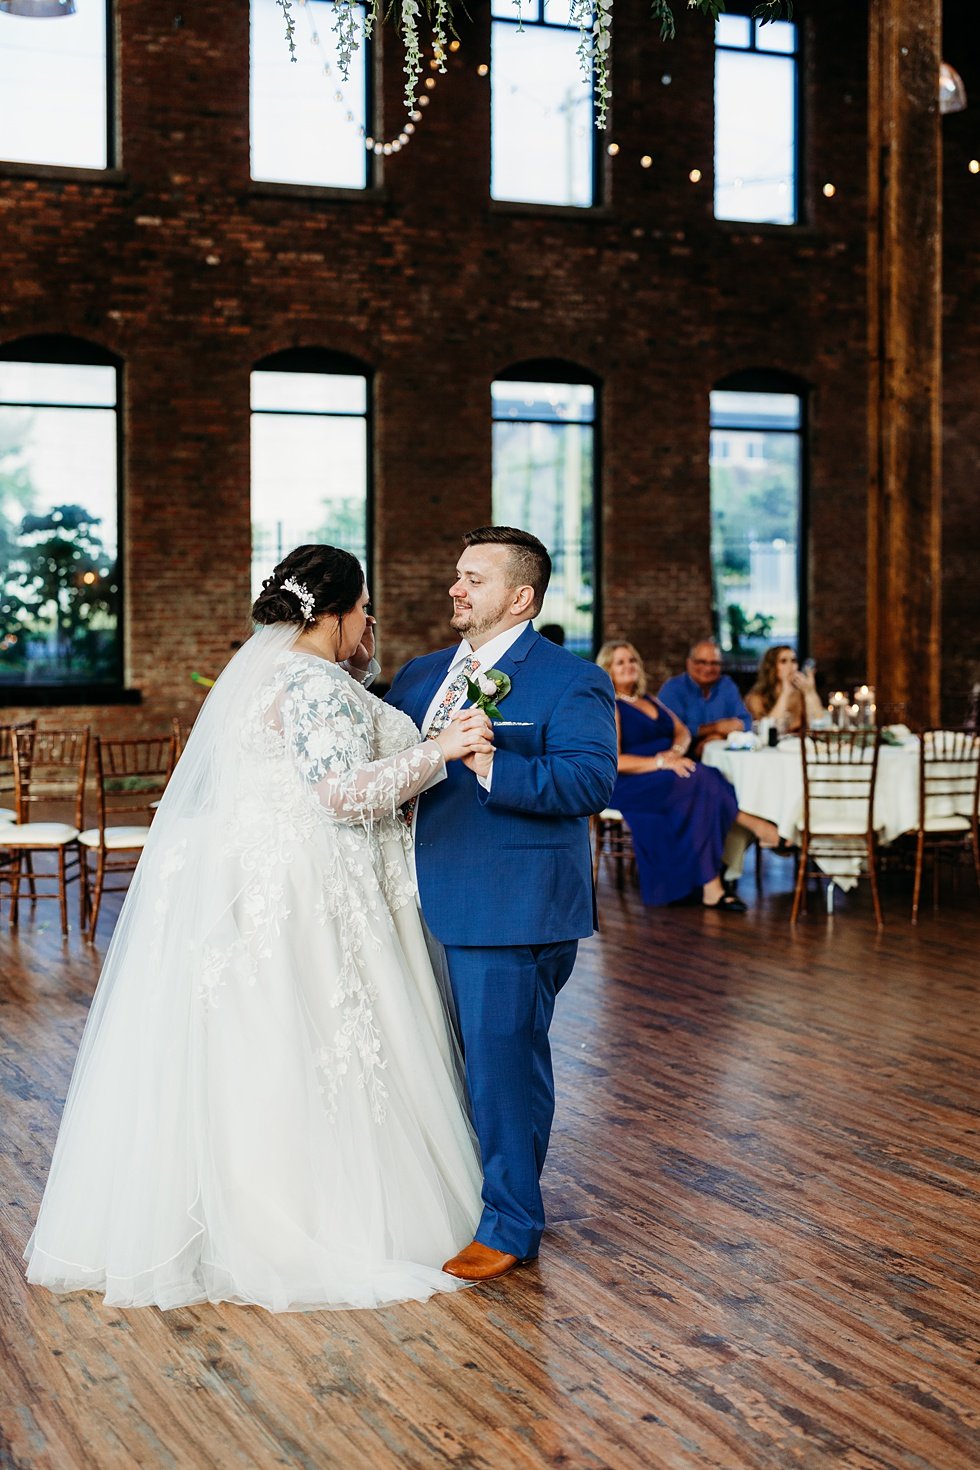  Bride and Groom first dance. Spring wedding at The Refinery Jeffersonville, Indiana 